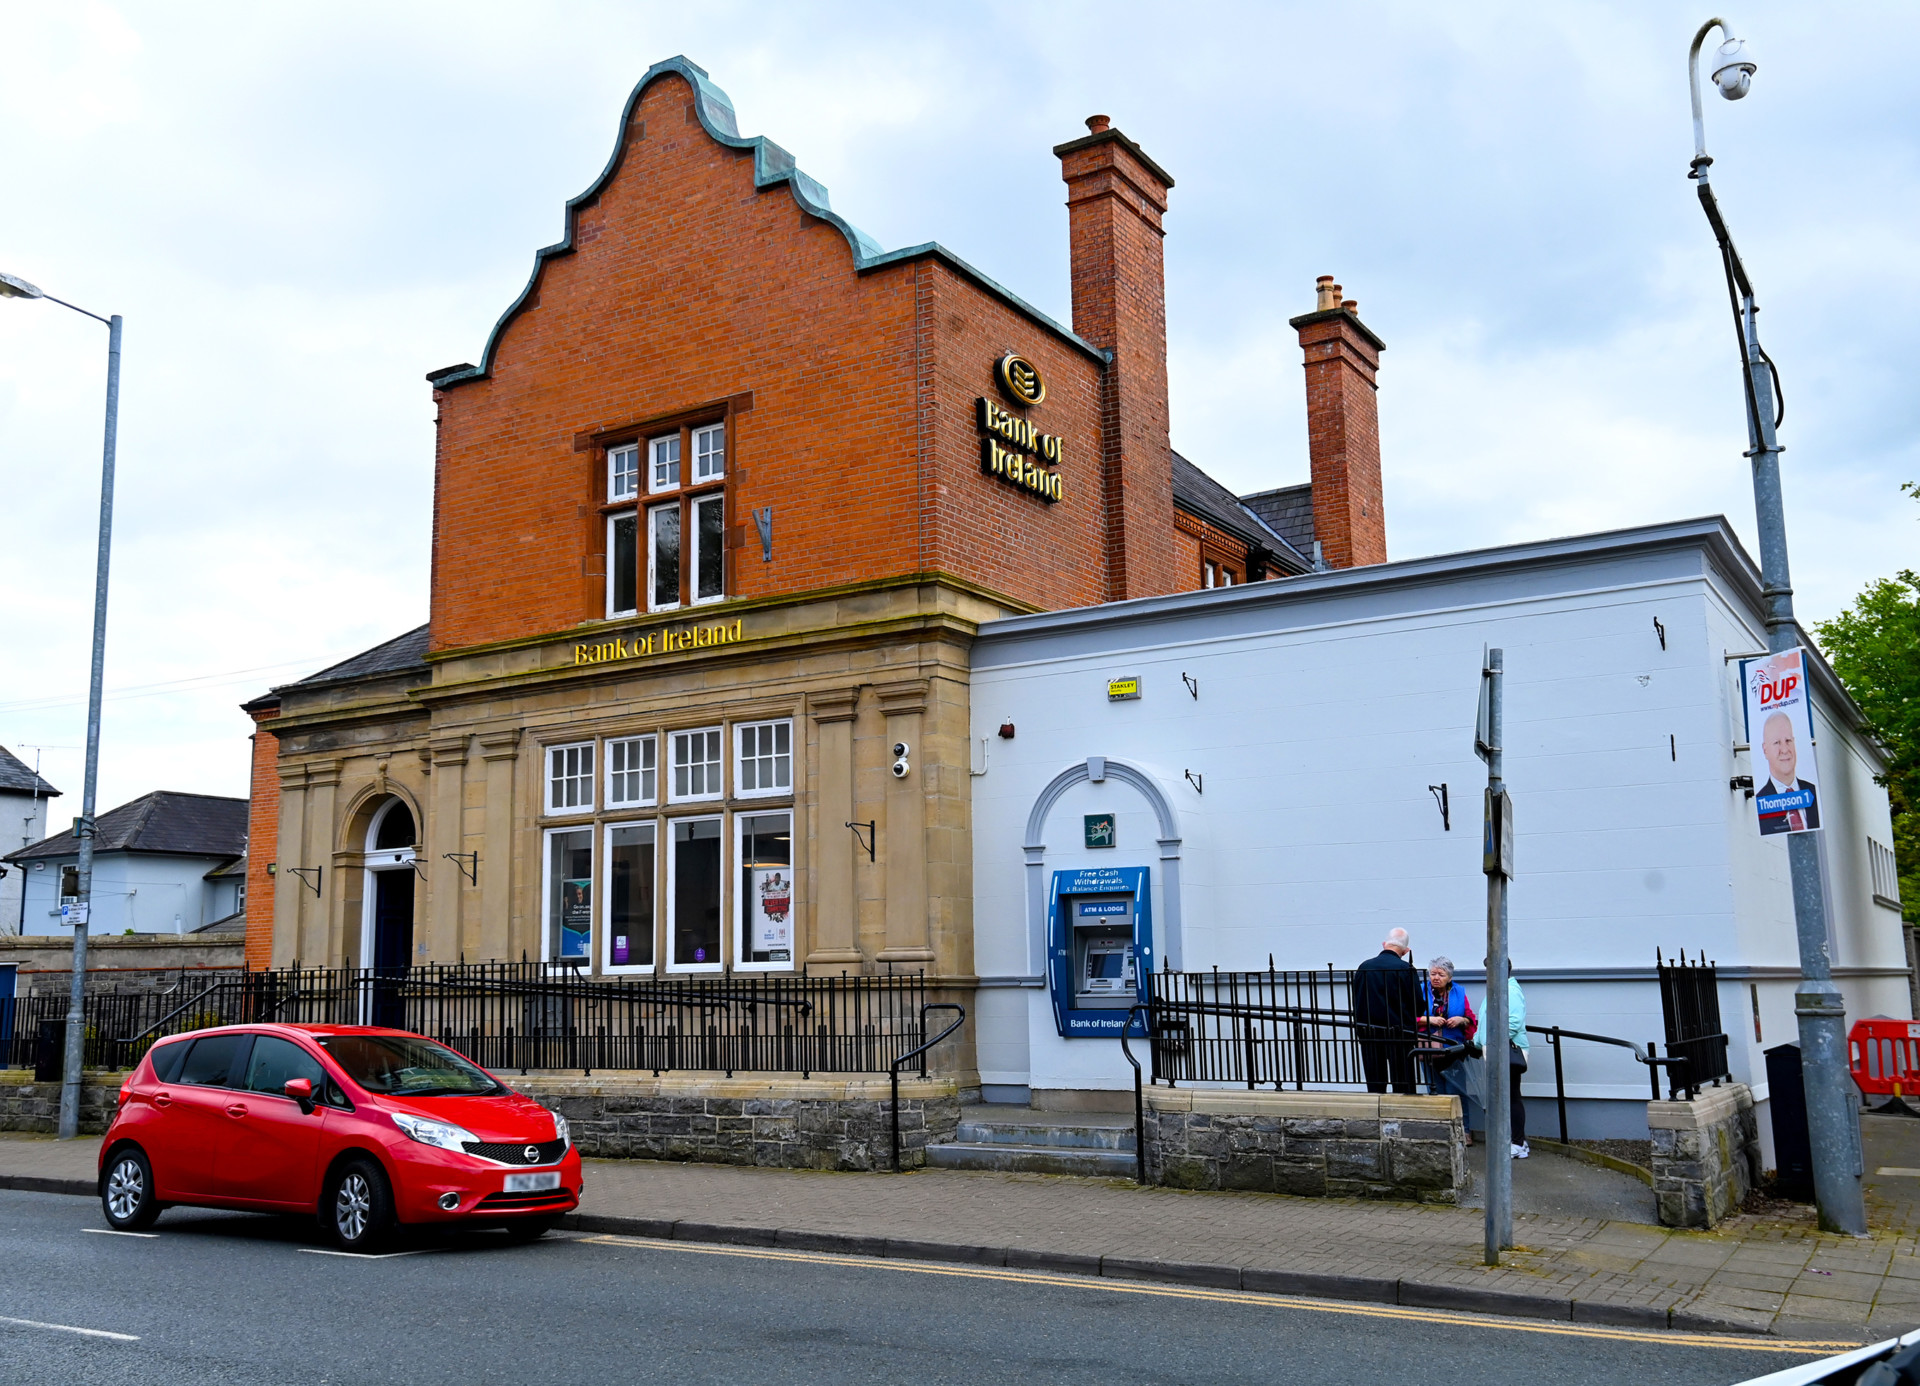 Internal refurbishment work planned for historic Omagh bank building